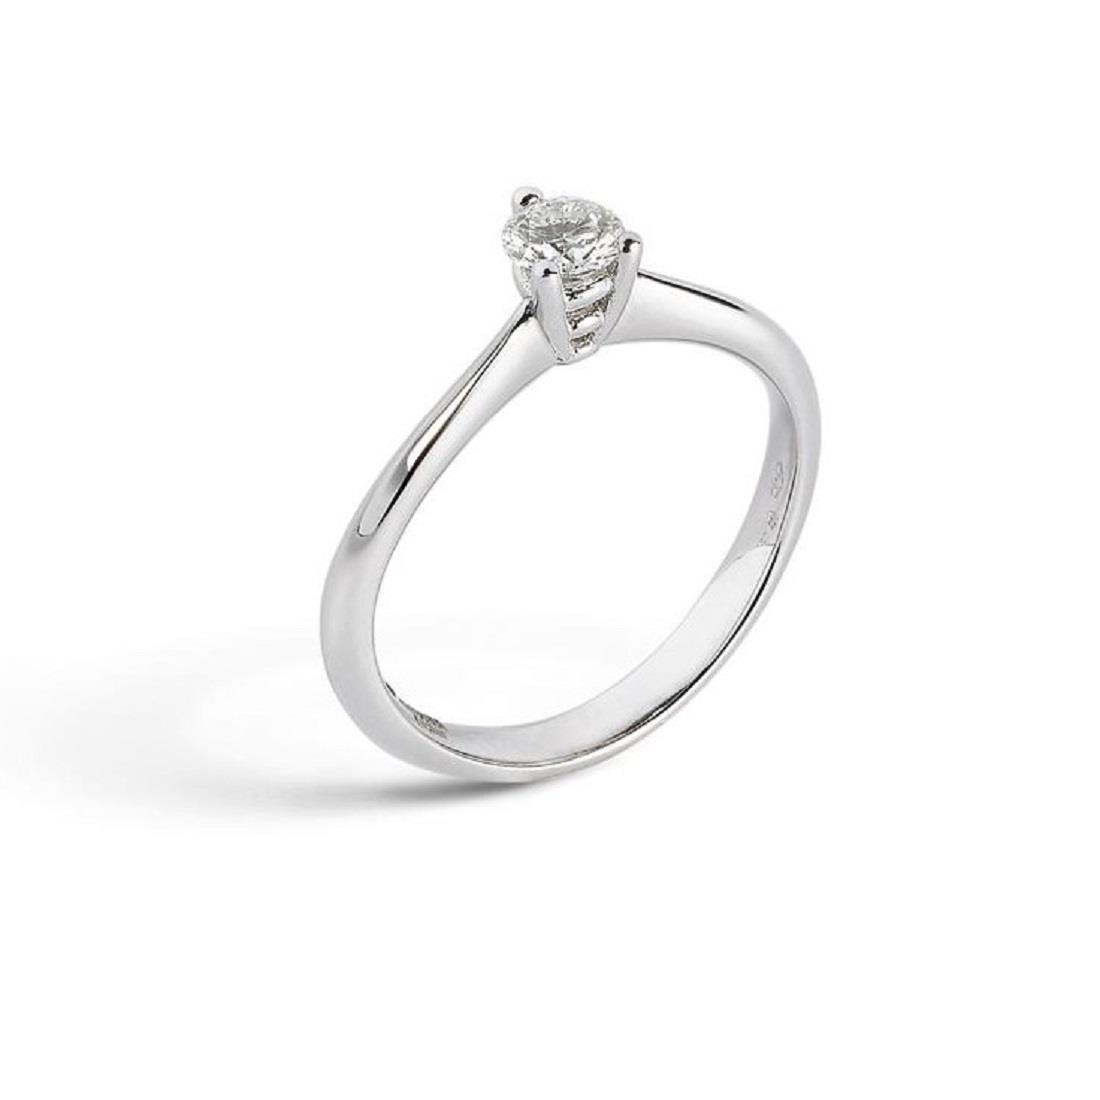 Gold solitaire ring with diamond ct. 0.30 - ALFIERI & ST. JOHN